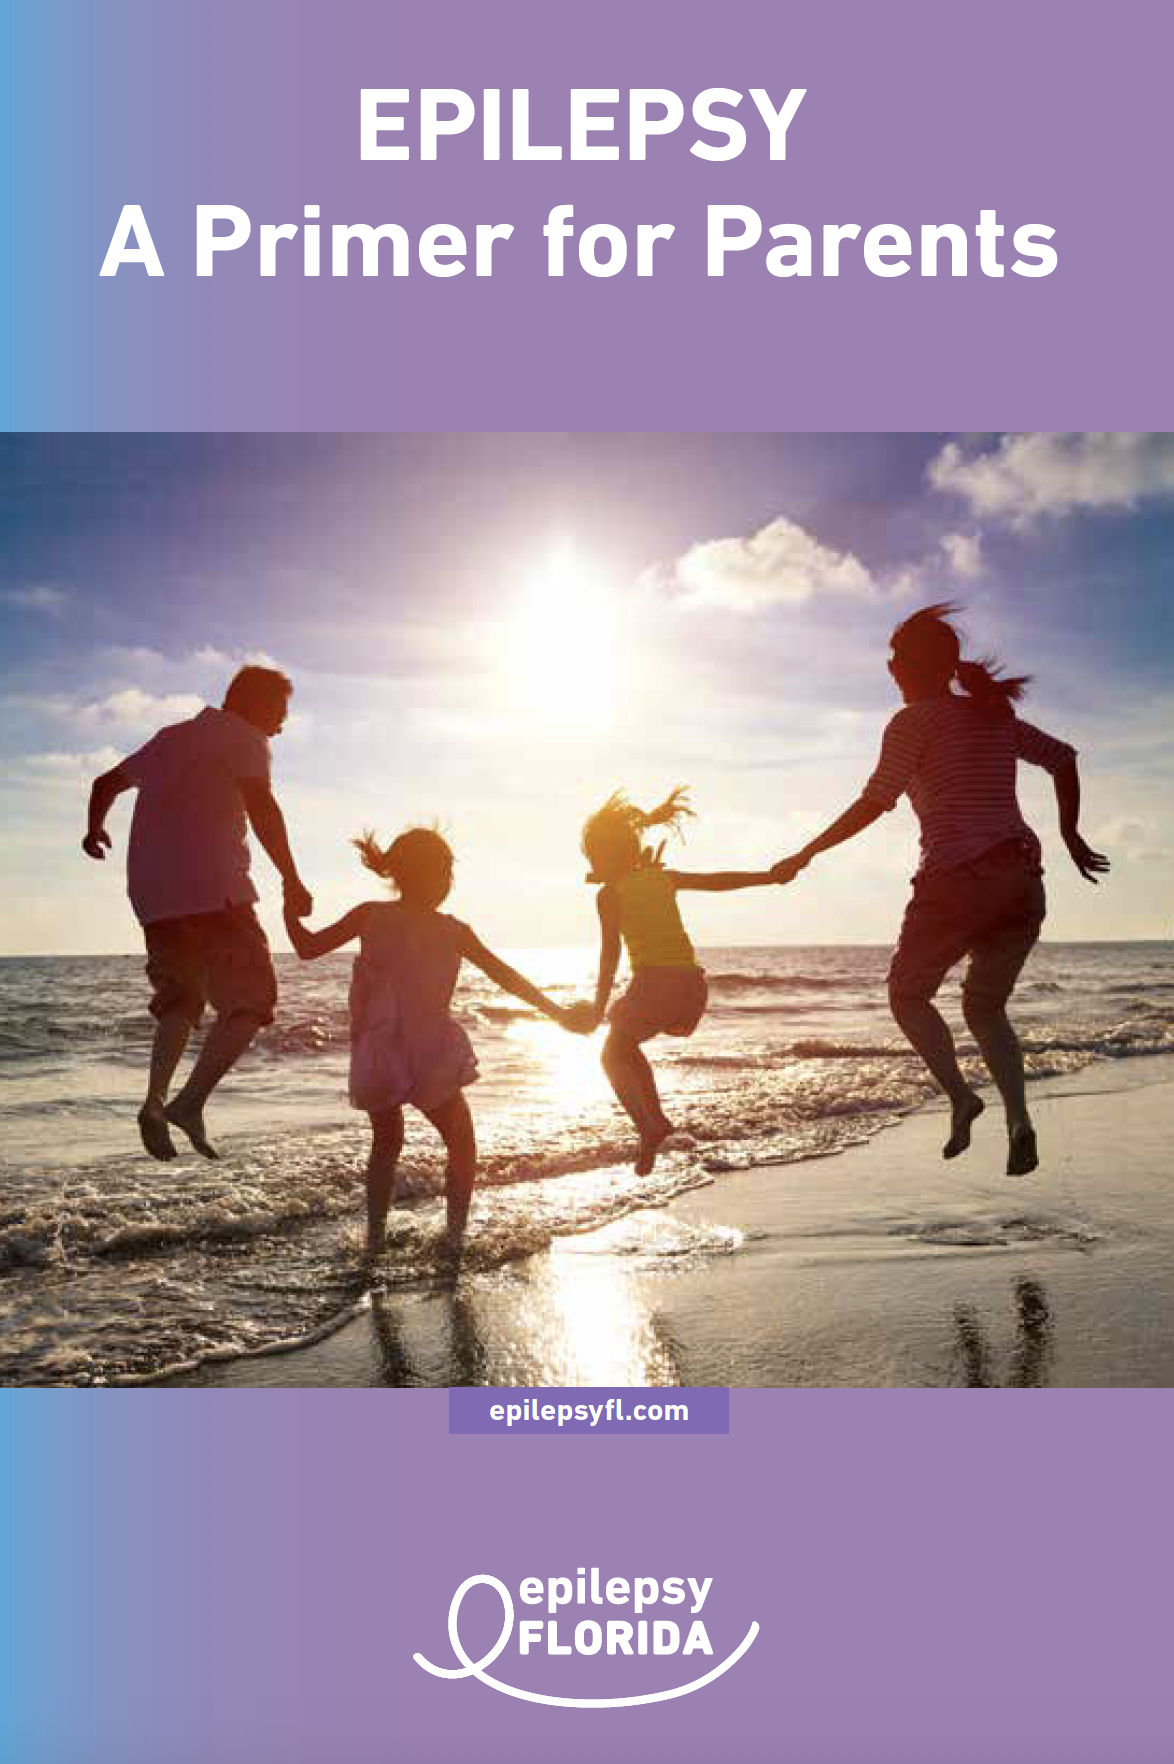 Epilepsy Alliance Florida - A Primer for Parents of Children with Epilepsy booklet